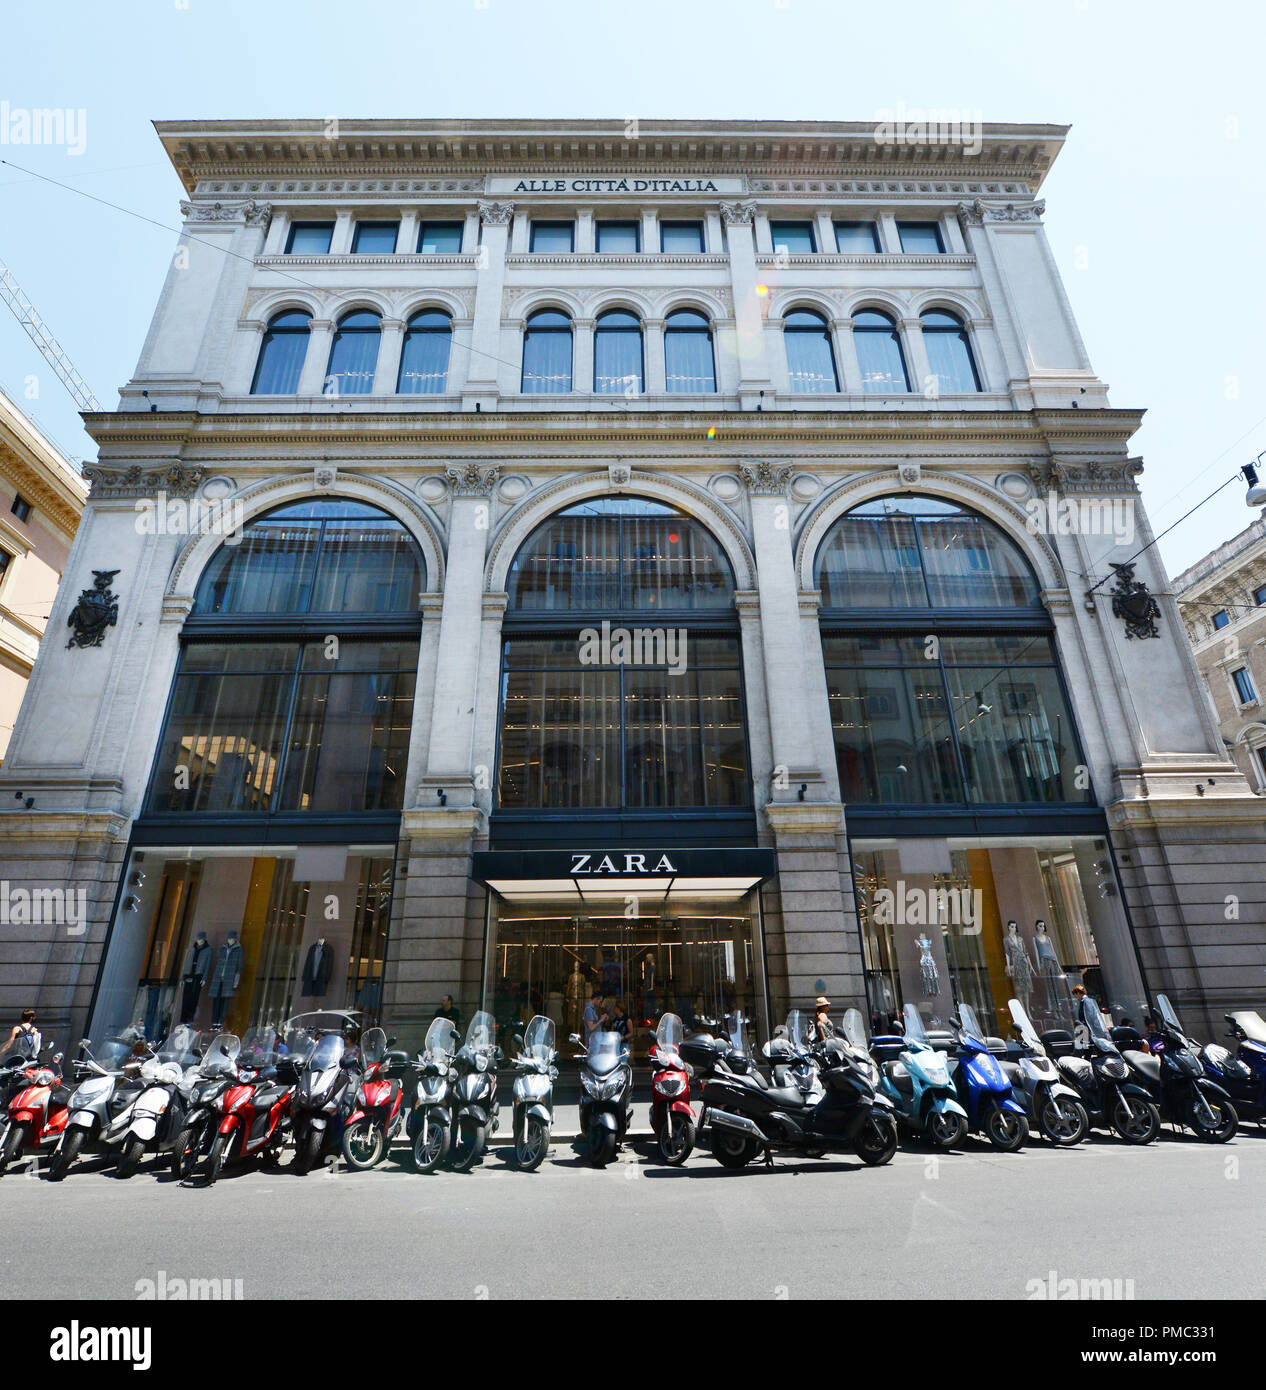 Zara Rome High Resolution Stock Photography and Images - Alamy